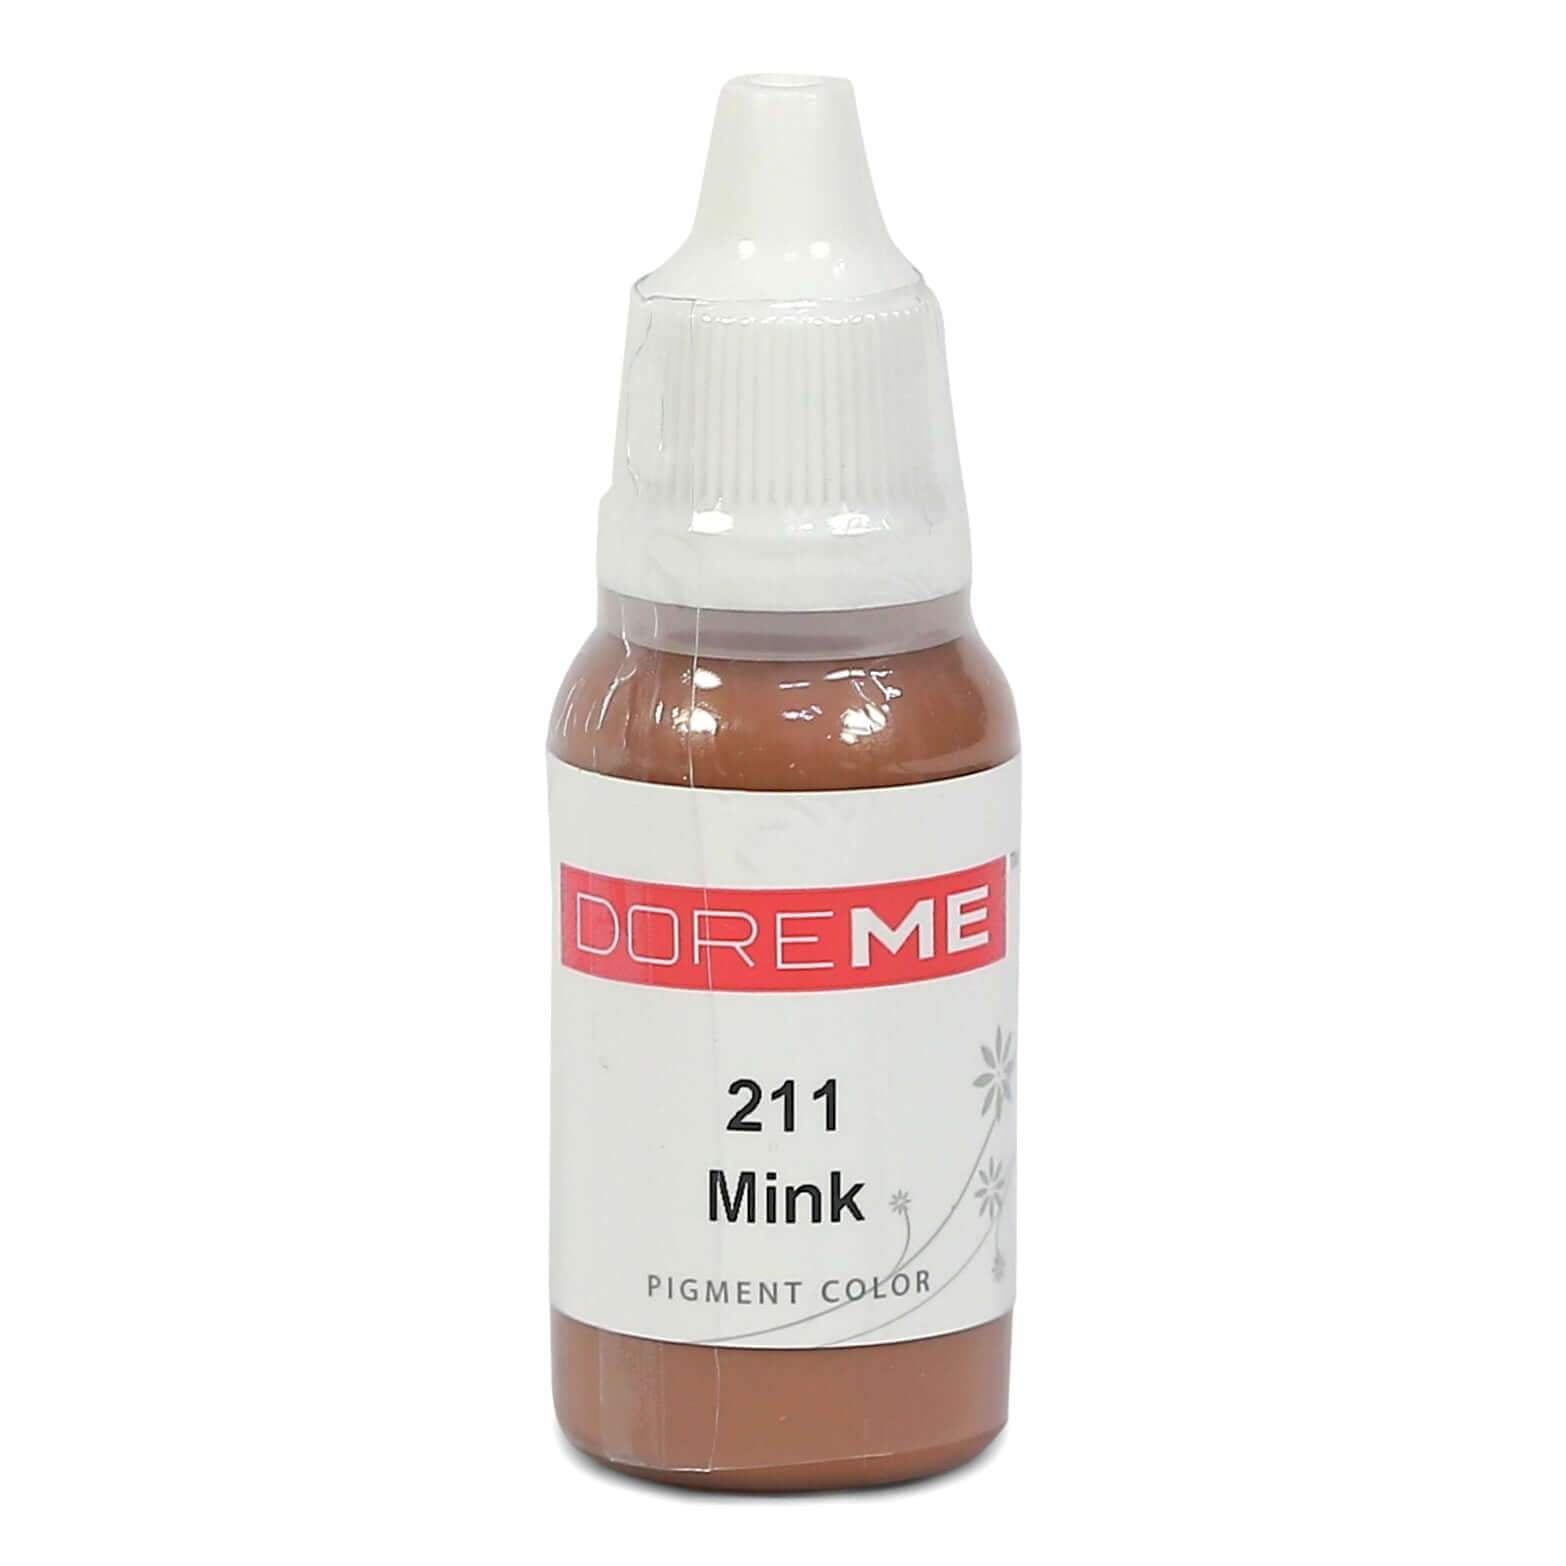 Permanent Makeup pigments Doreme Micropigmentation Eyebrow, Eyeliner, Lip Colours 211 Mink (n) - Beautiful Ink UK trade and wholesale supplier